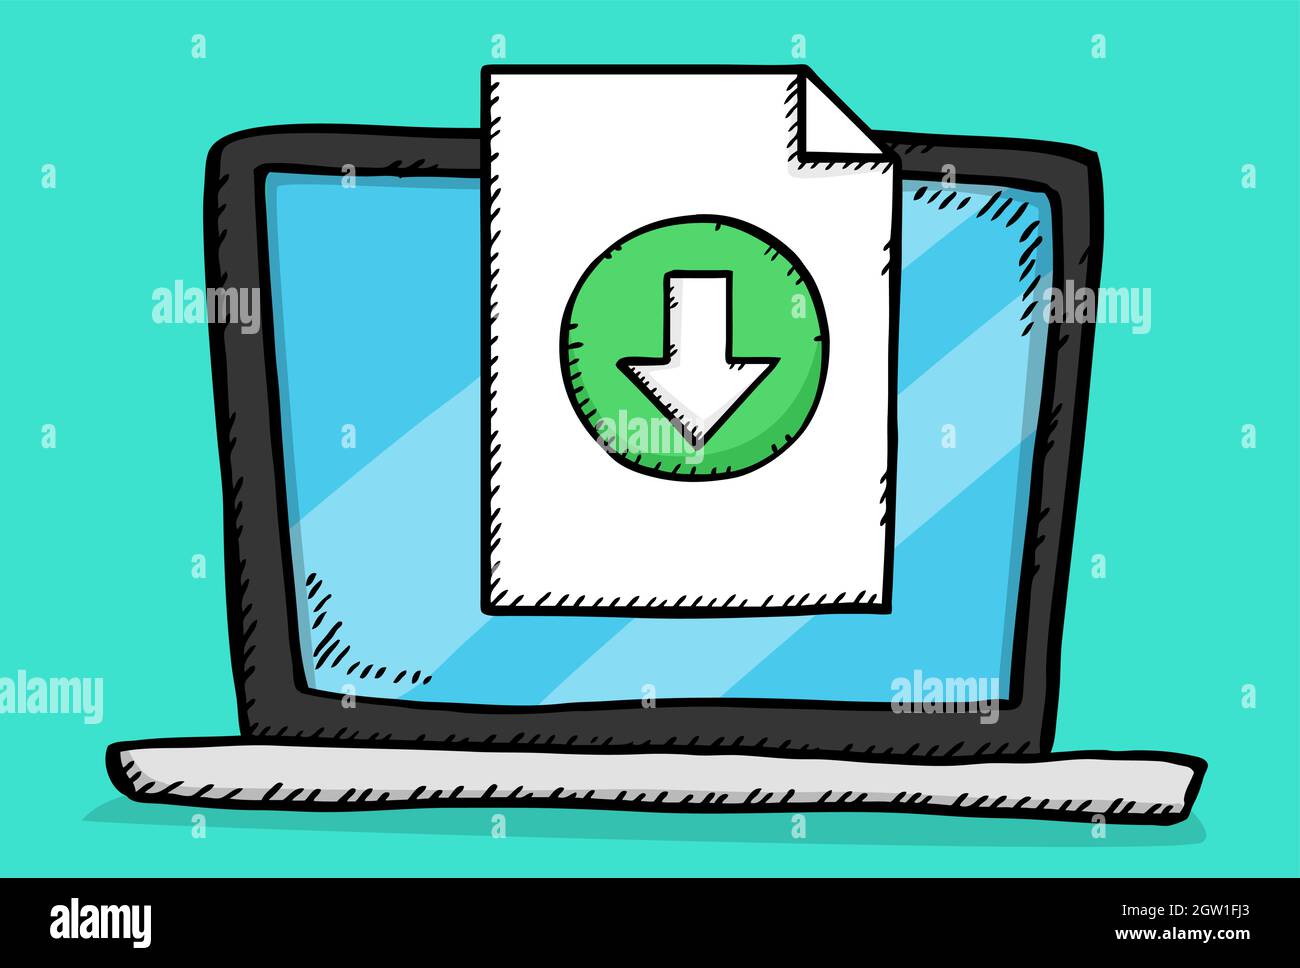 Hand drawn vector illustration of downloading file, on laptop screen. Colorful doodle with download button. Stock Vector